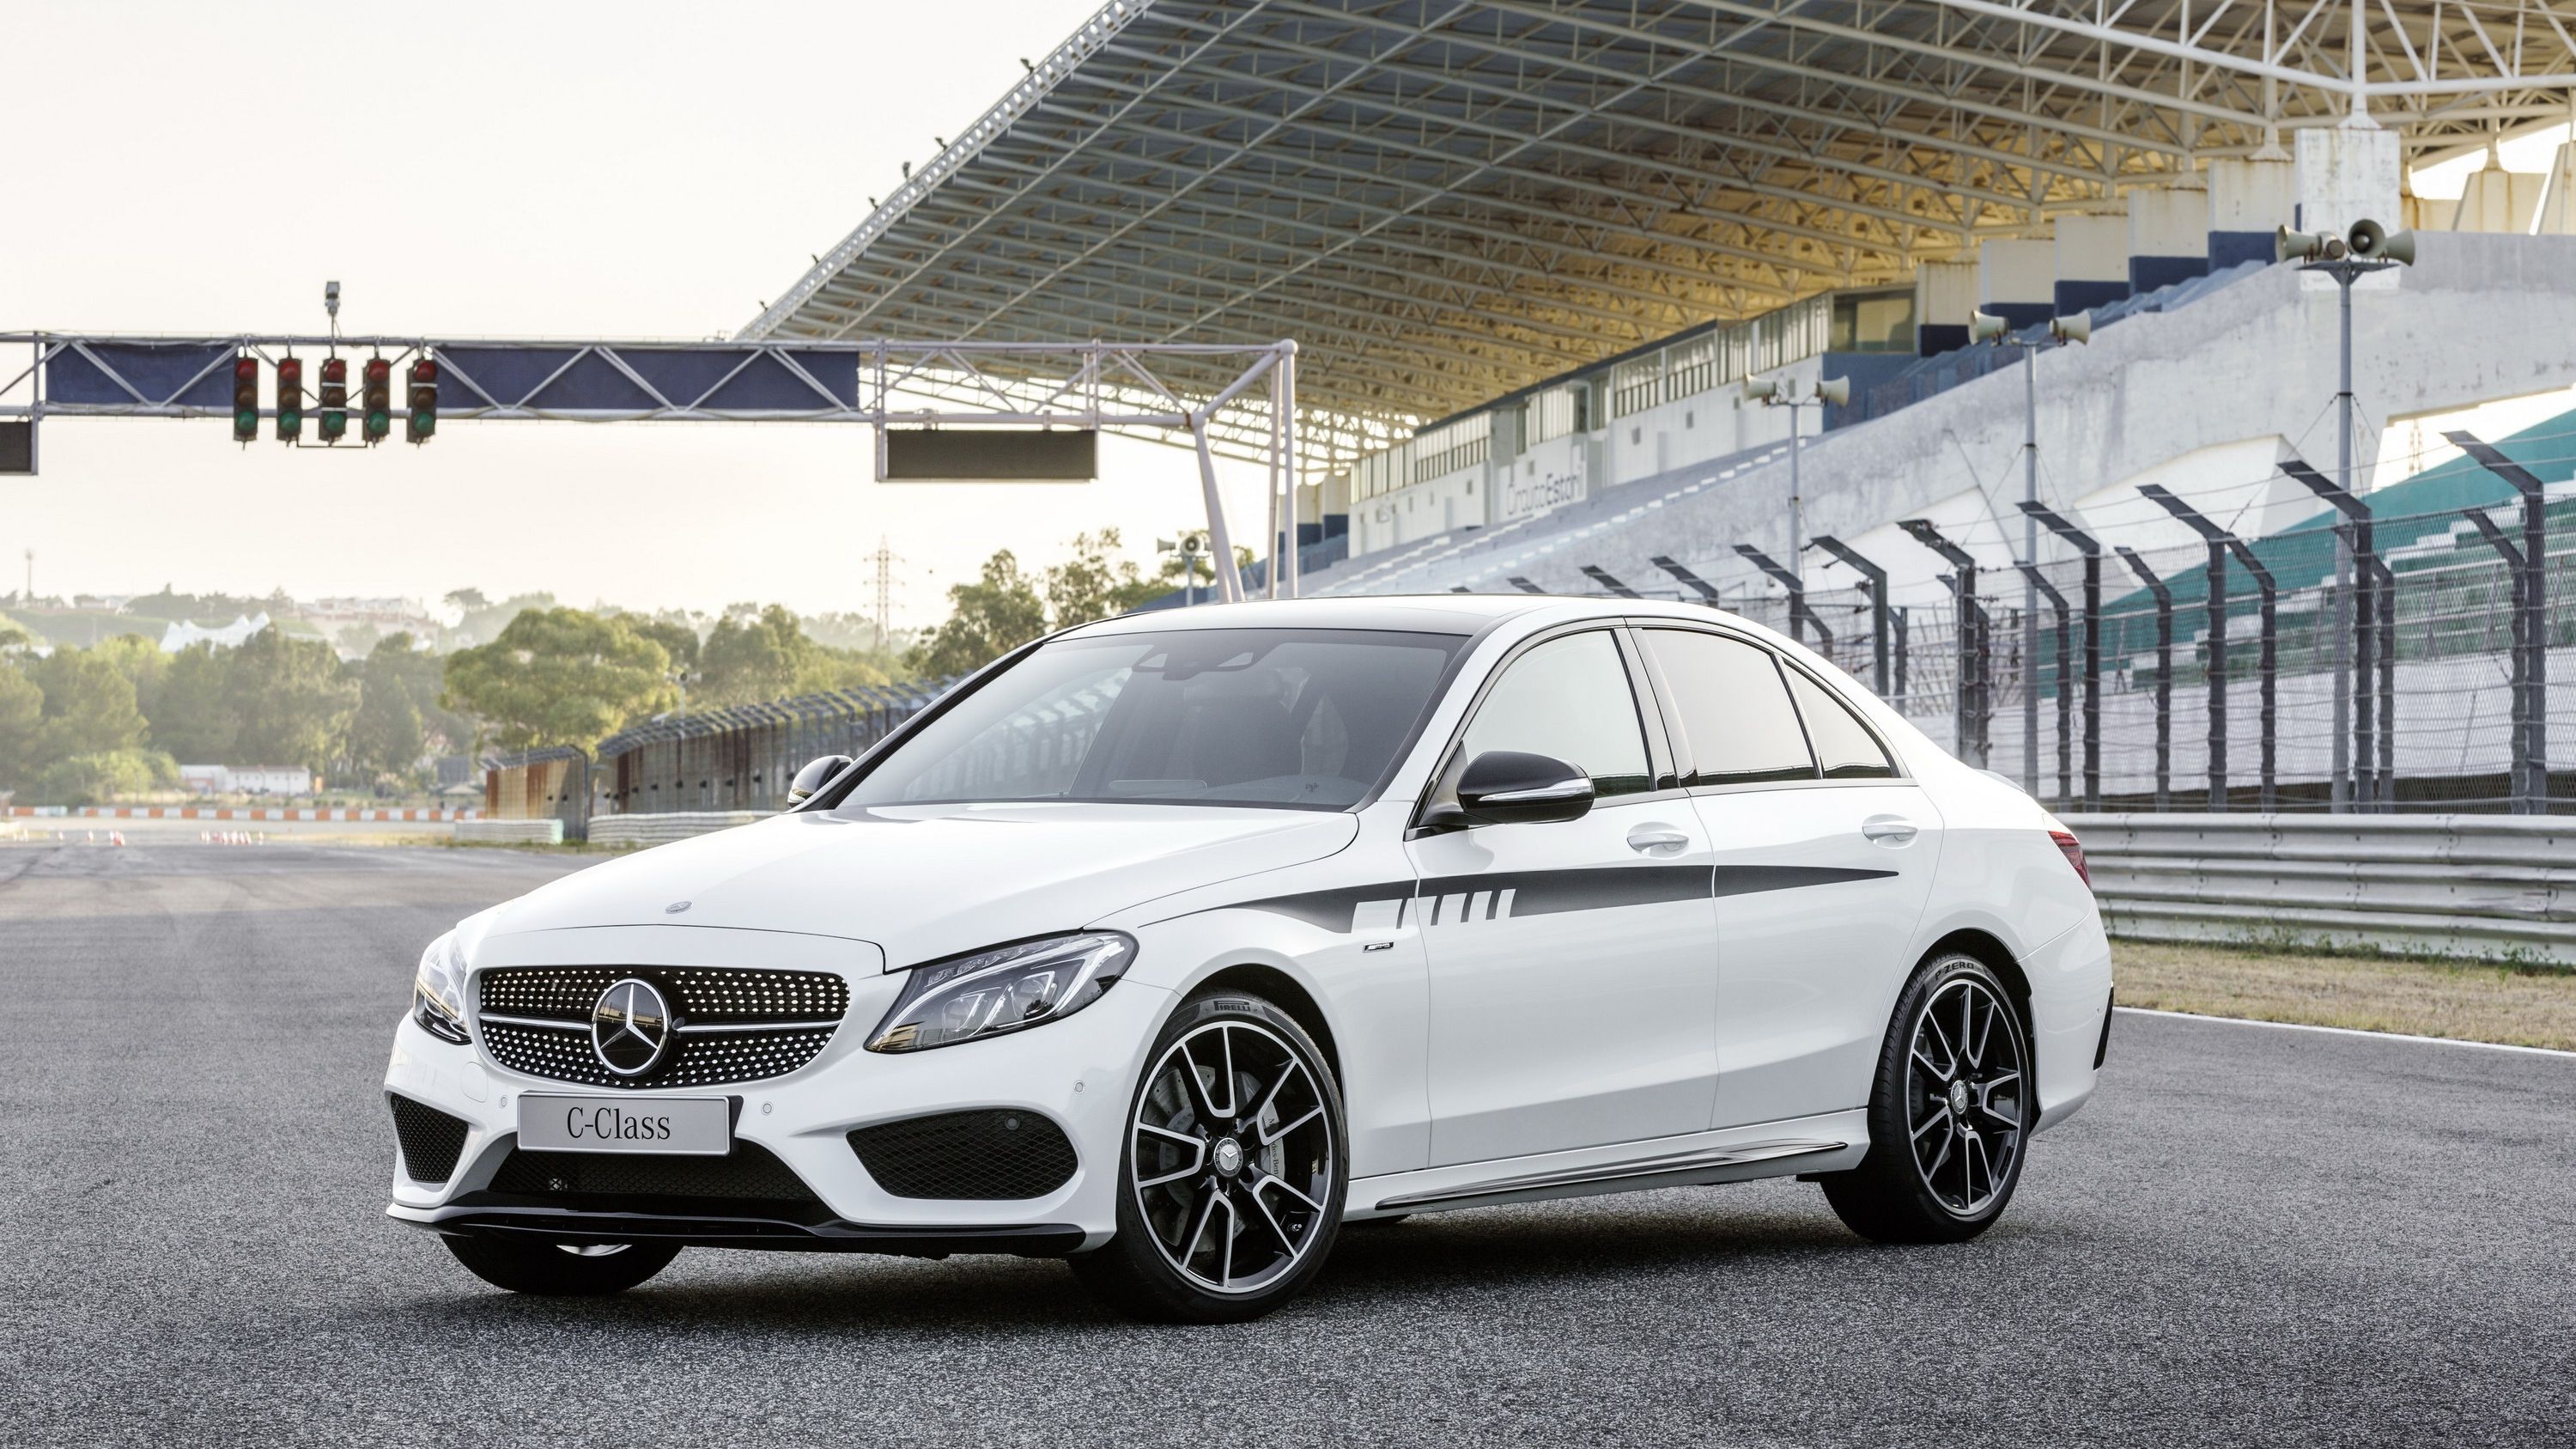 2015 Mercedes C-Class With AMG Accessories